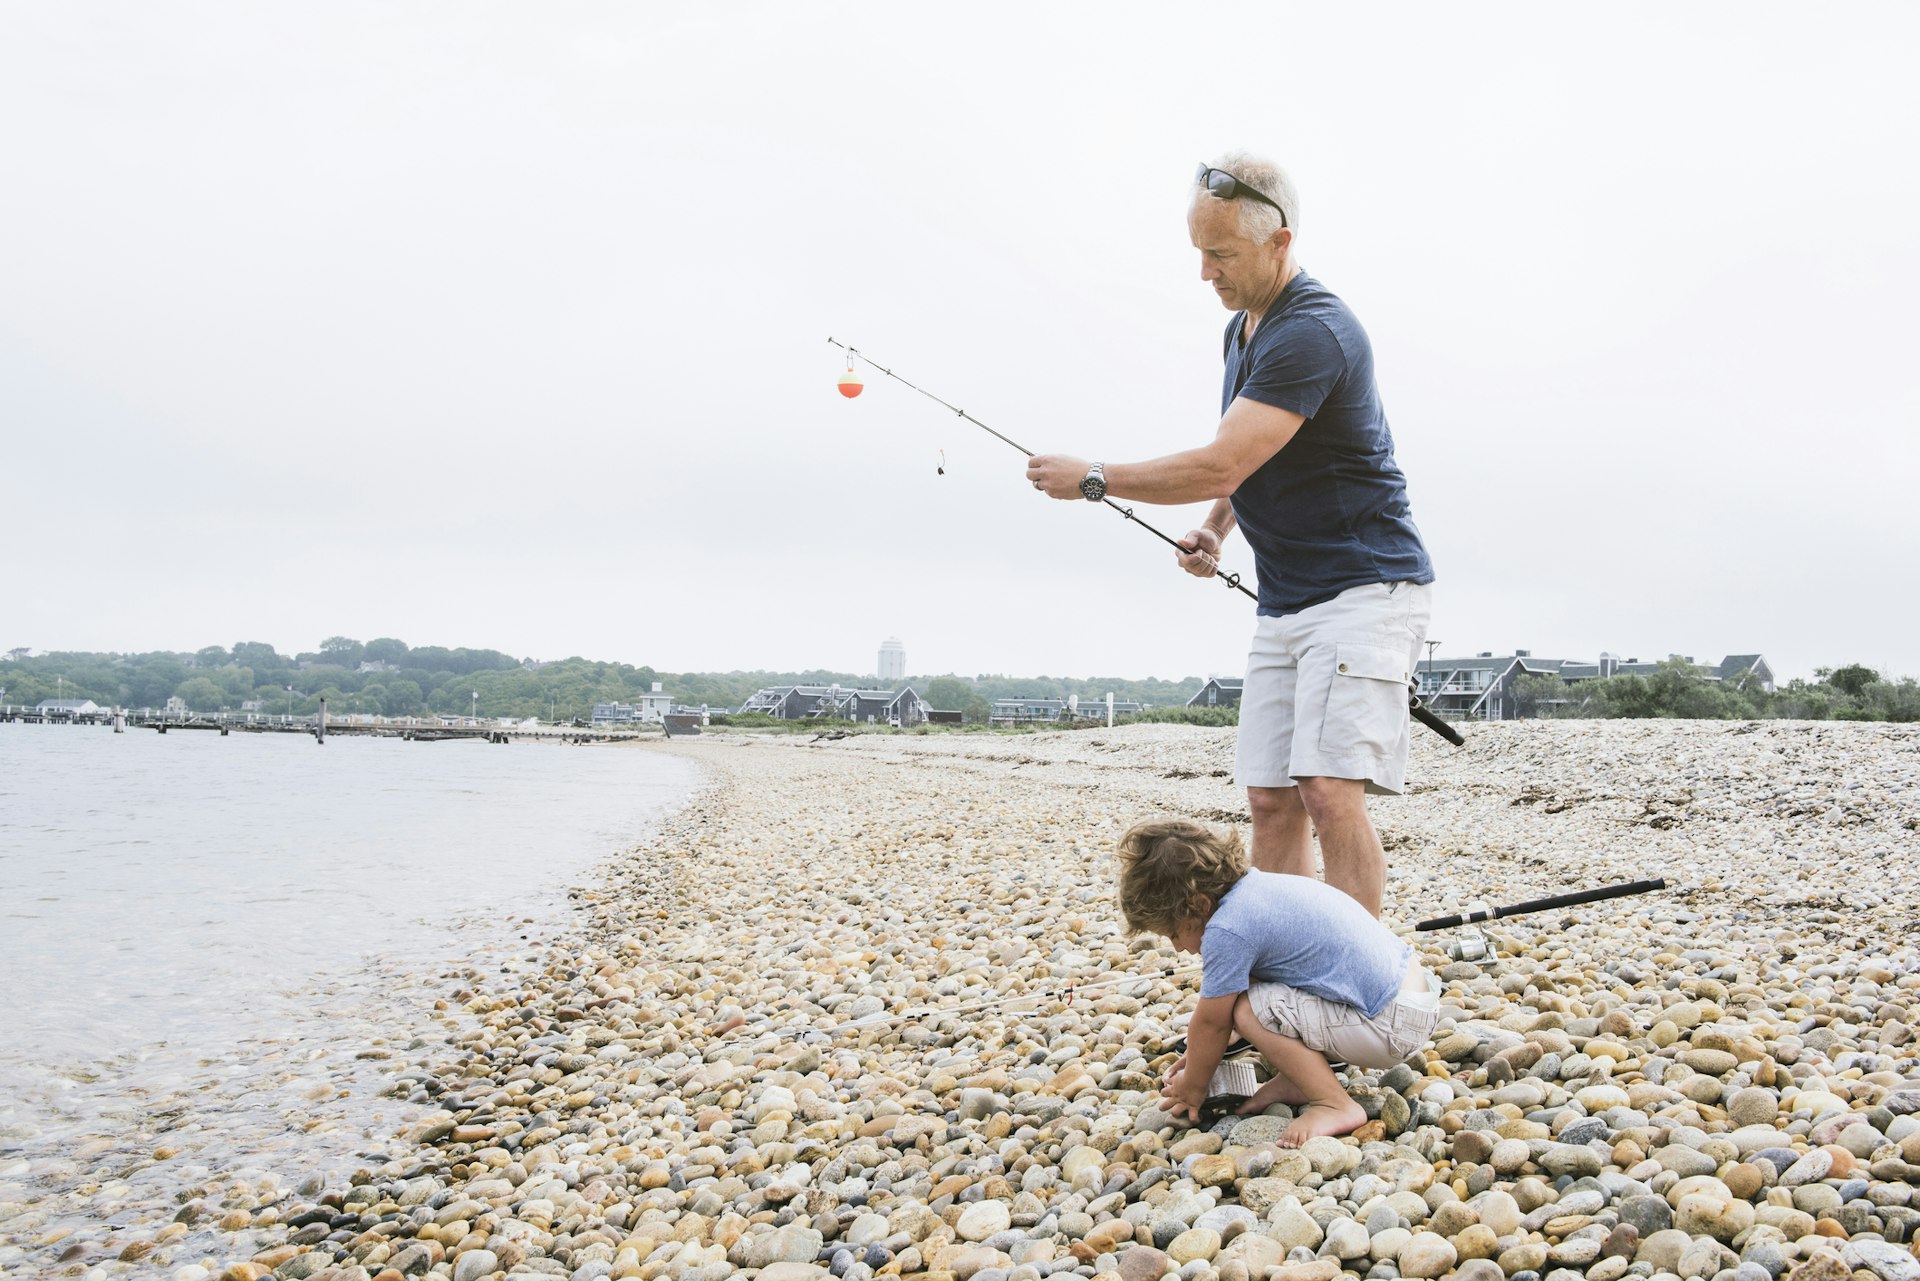 Father and son fishing at a pebble beach in Montauk, New York State